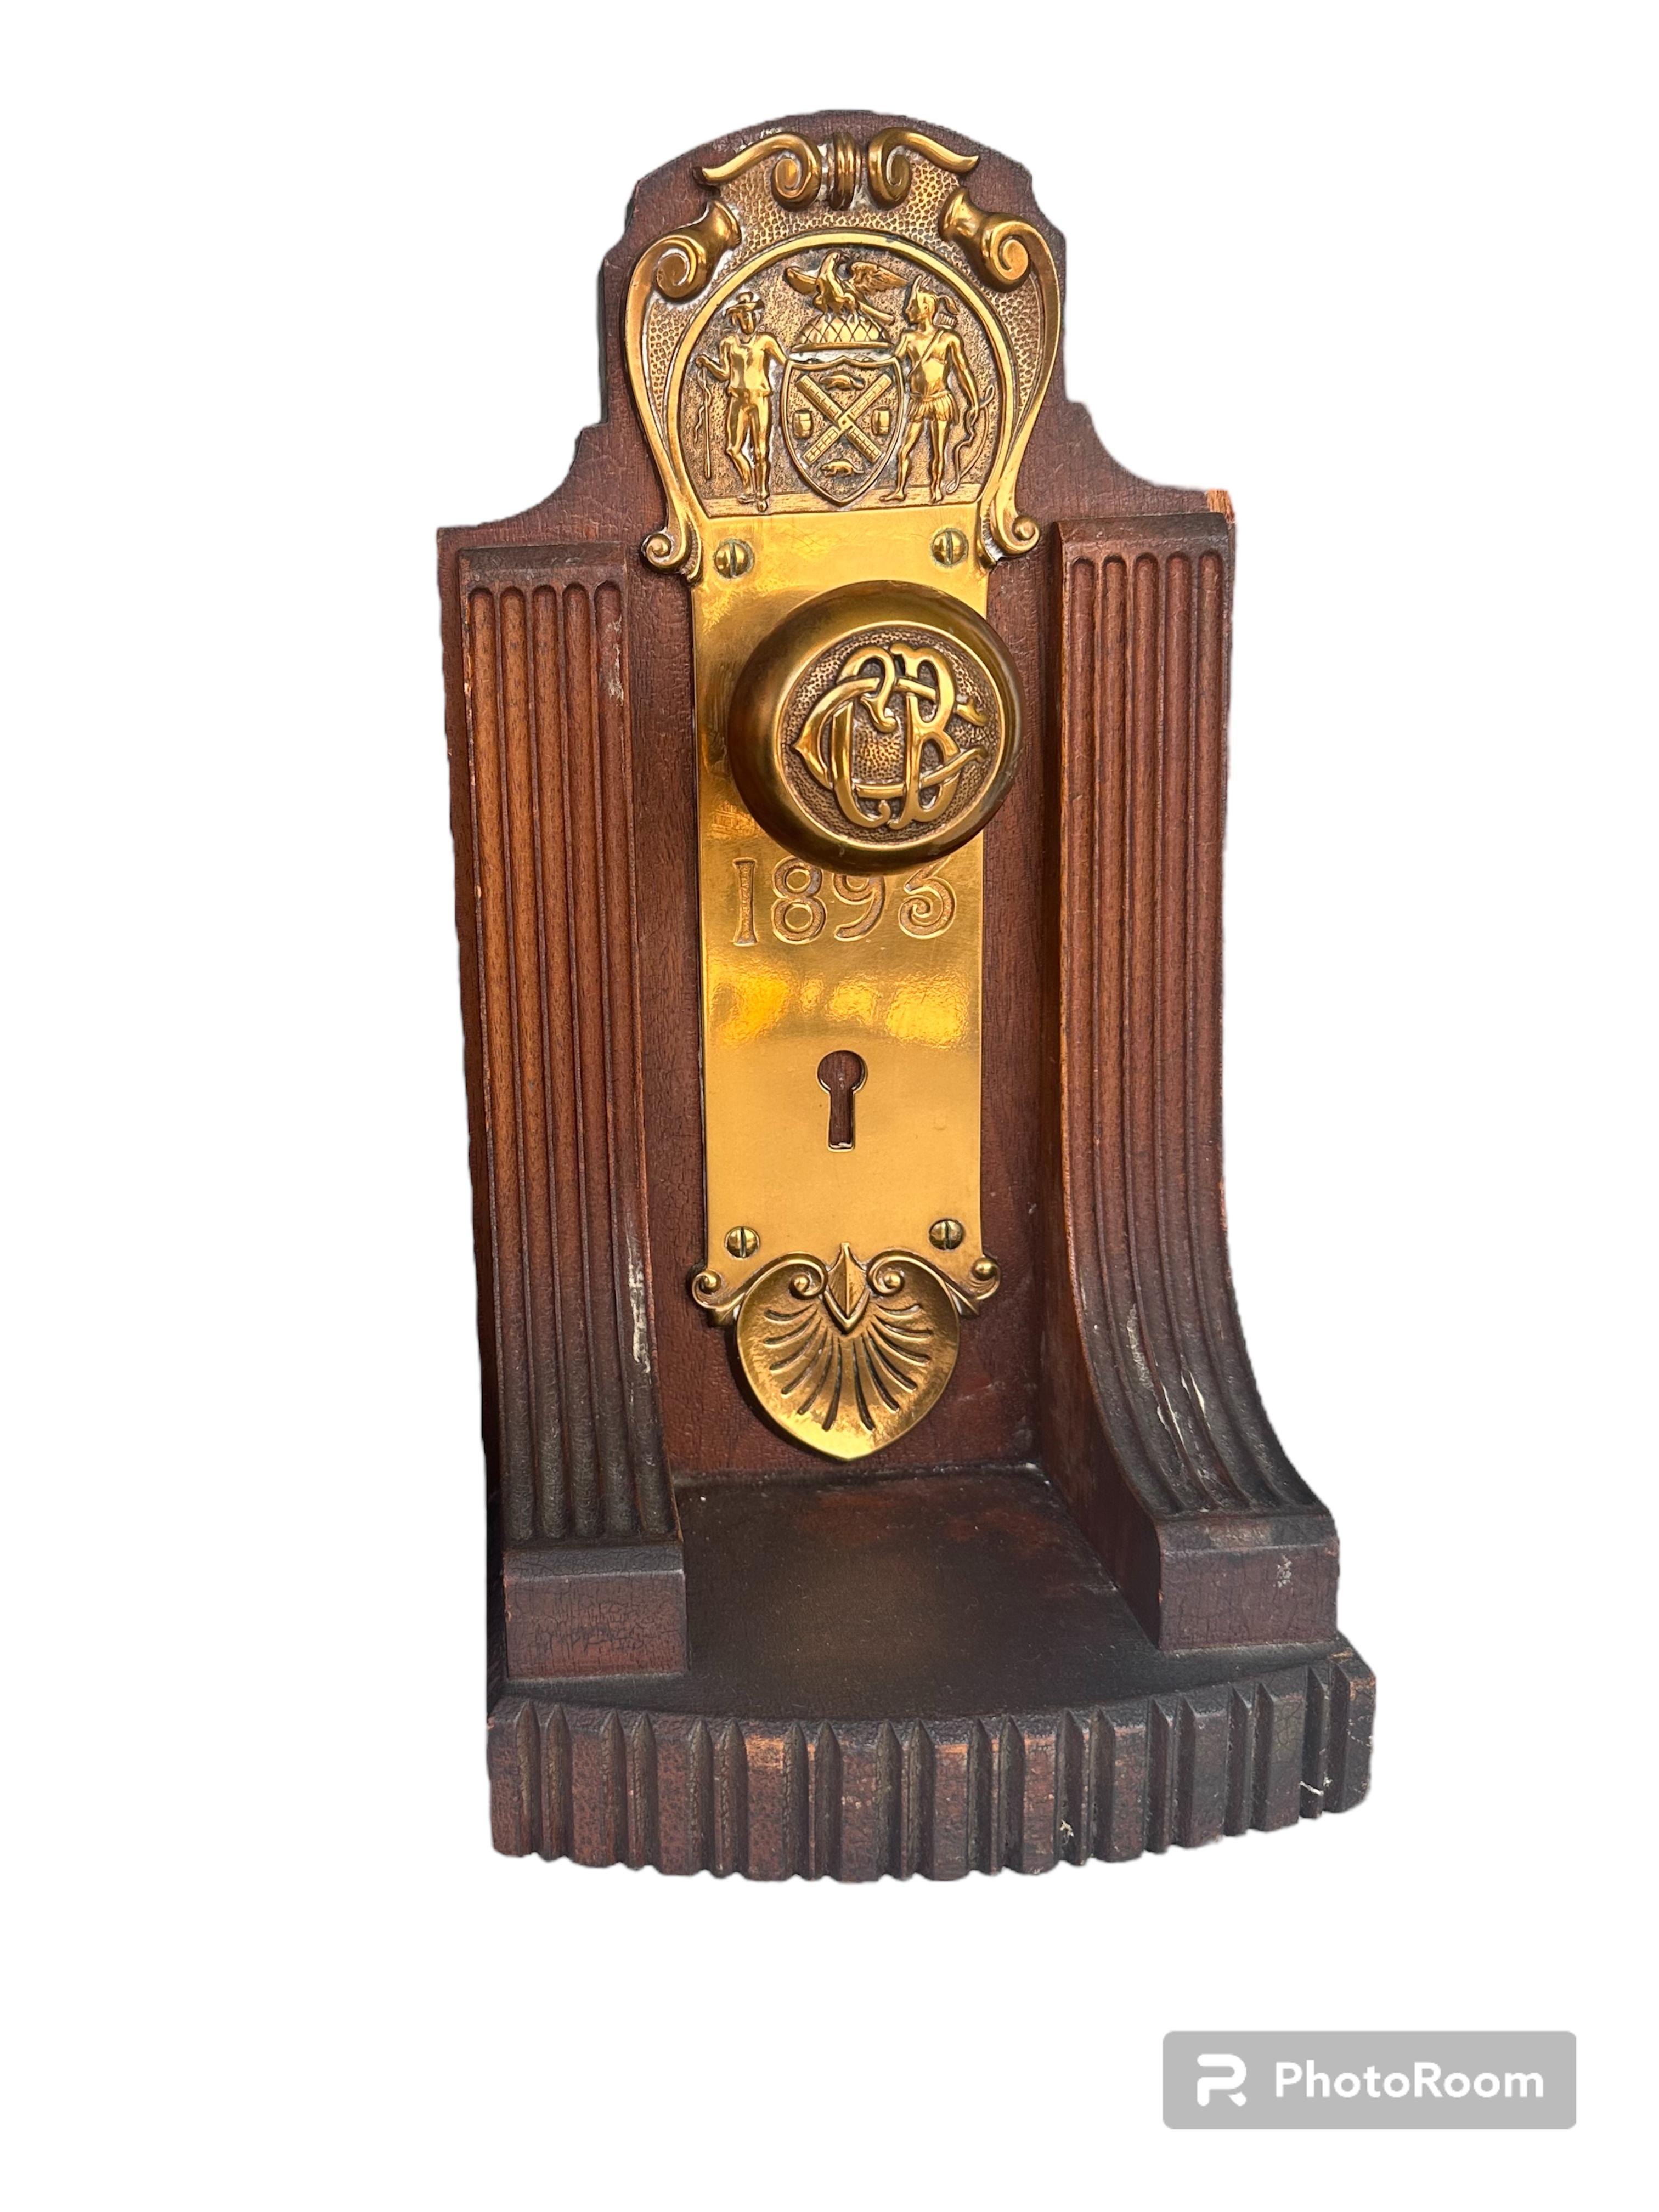 Native American Custom Made Book Ends with Brass Door-knobs of NYC Official Seal Dated 1895